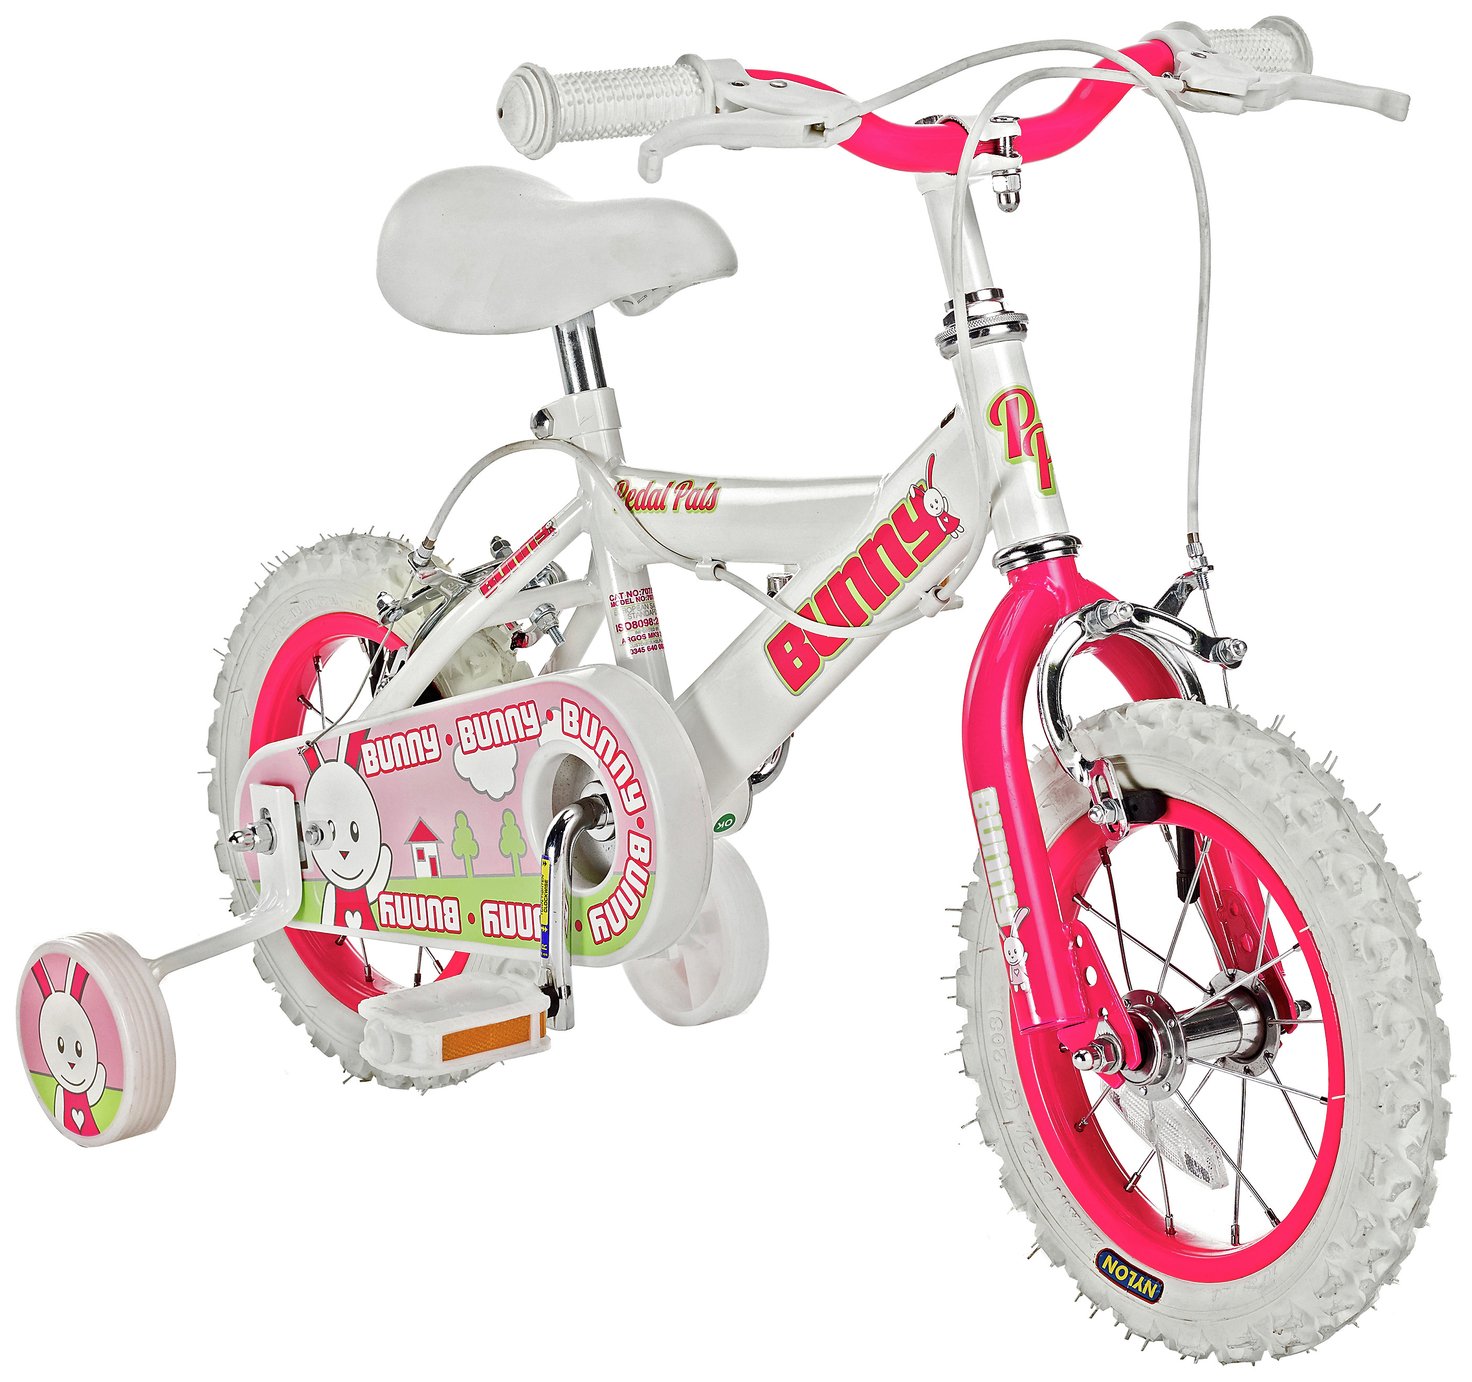 Pedal Pals 12 Inch Bunny Bike review